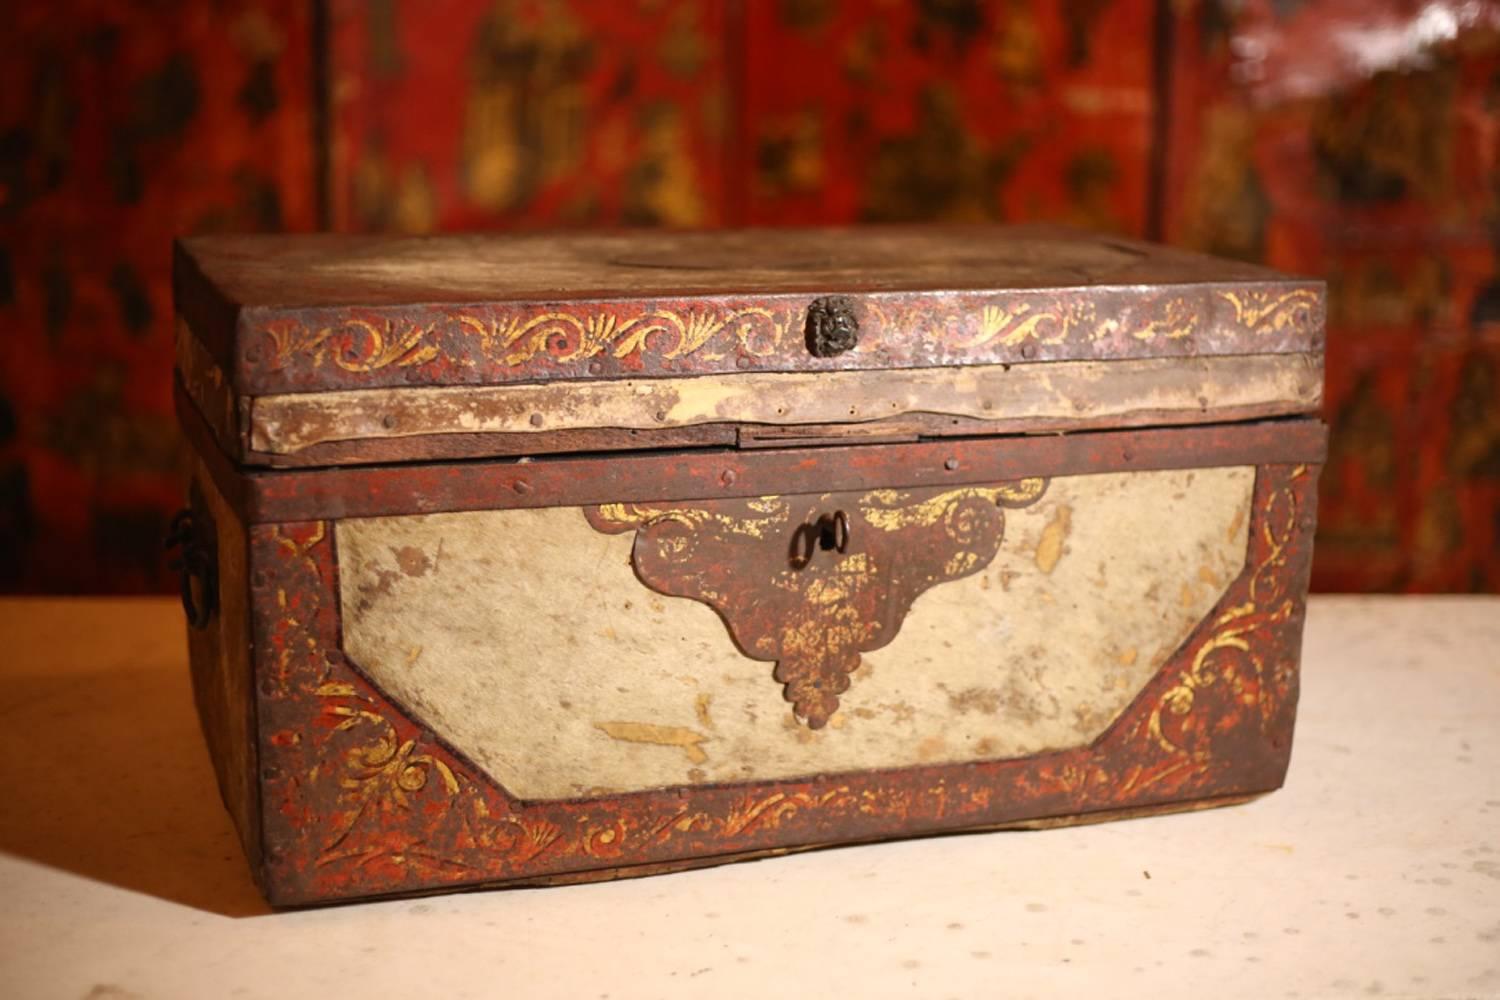 This is the most impressive pony hide covered trunk I have ever seen. It eats to the late 18th century to the early 19th century. Not only does it come with remains of original paint but it also has a fully working lock with original key. The pony